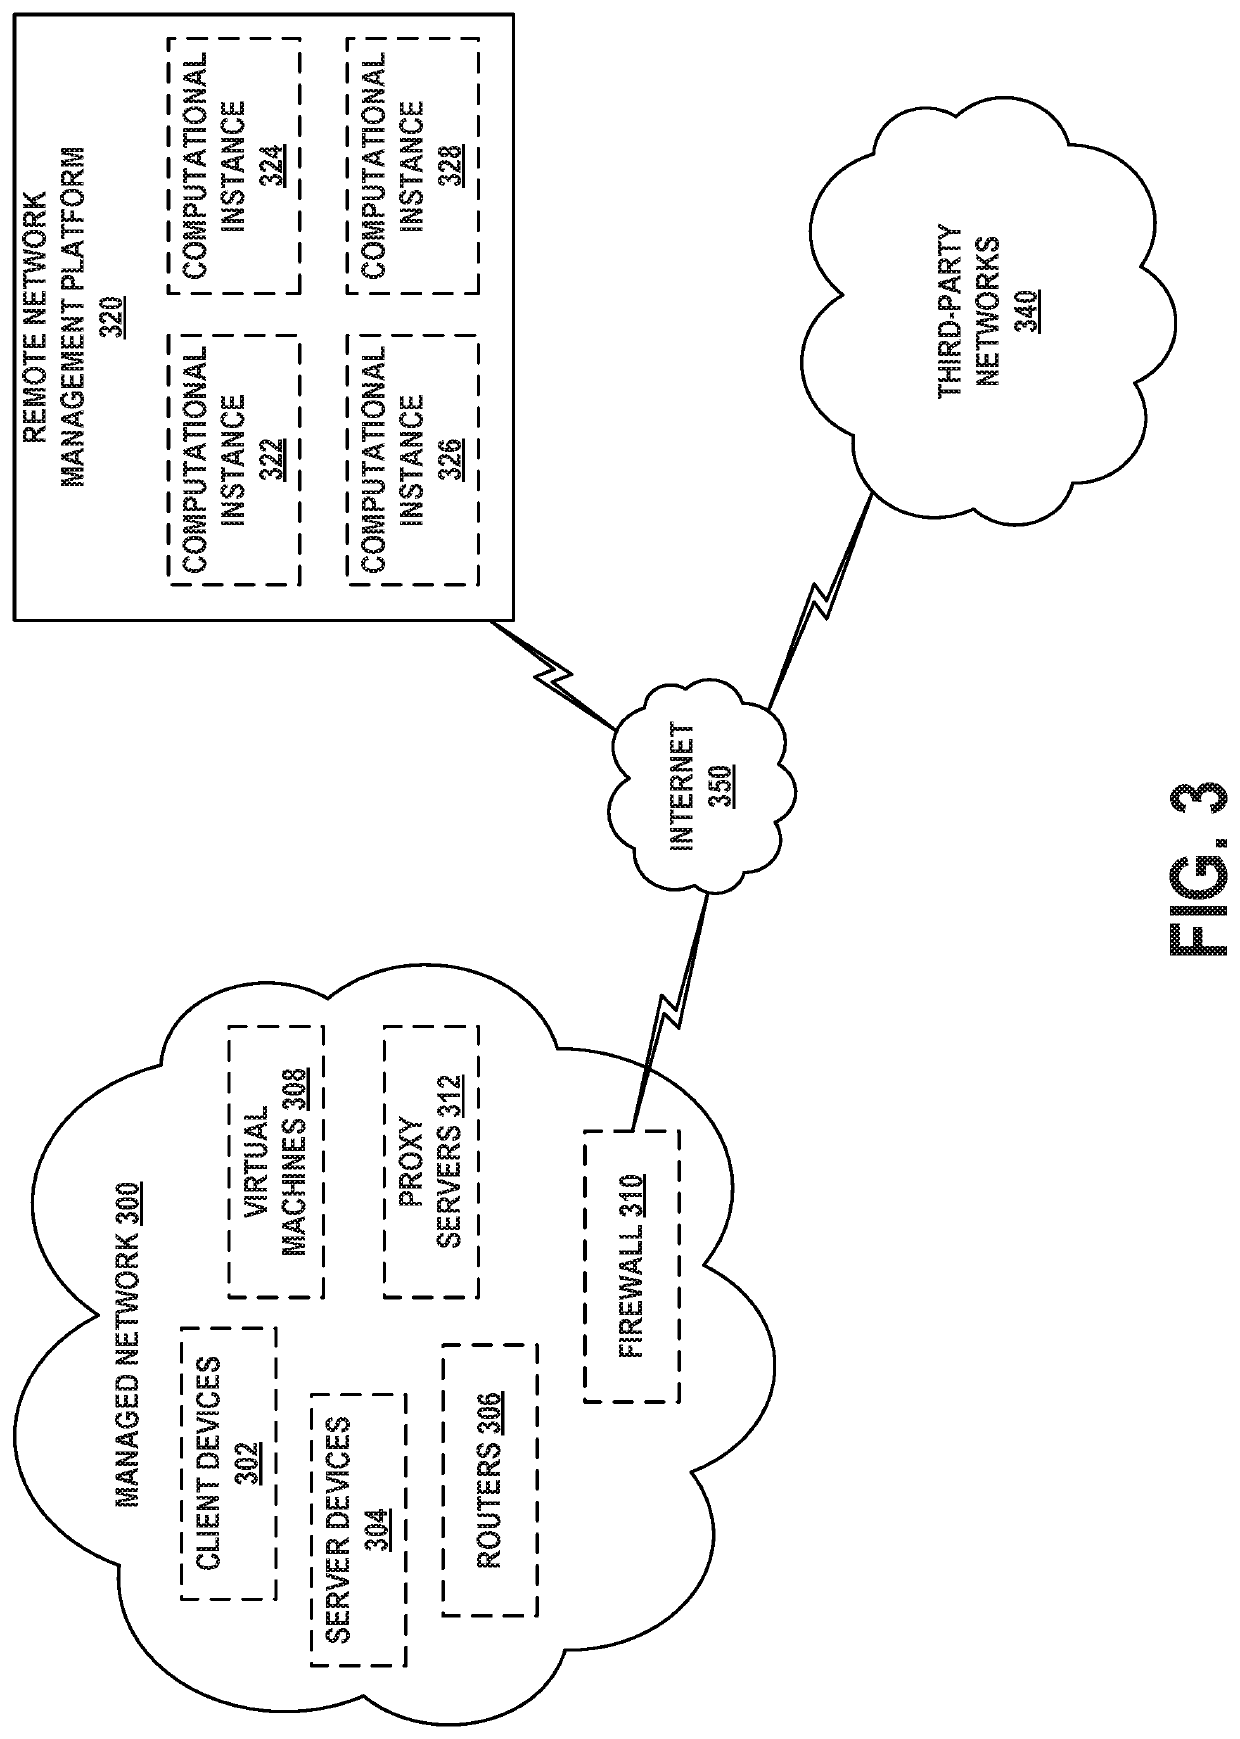 Parsing of user queries in a remote network management platform using linguistic matching